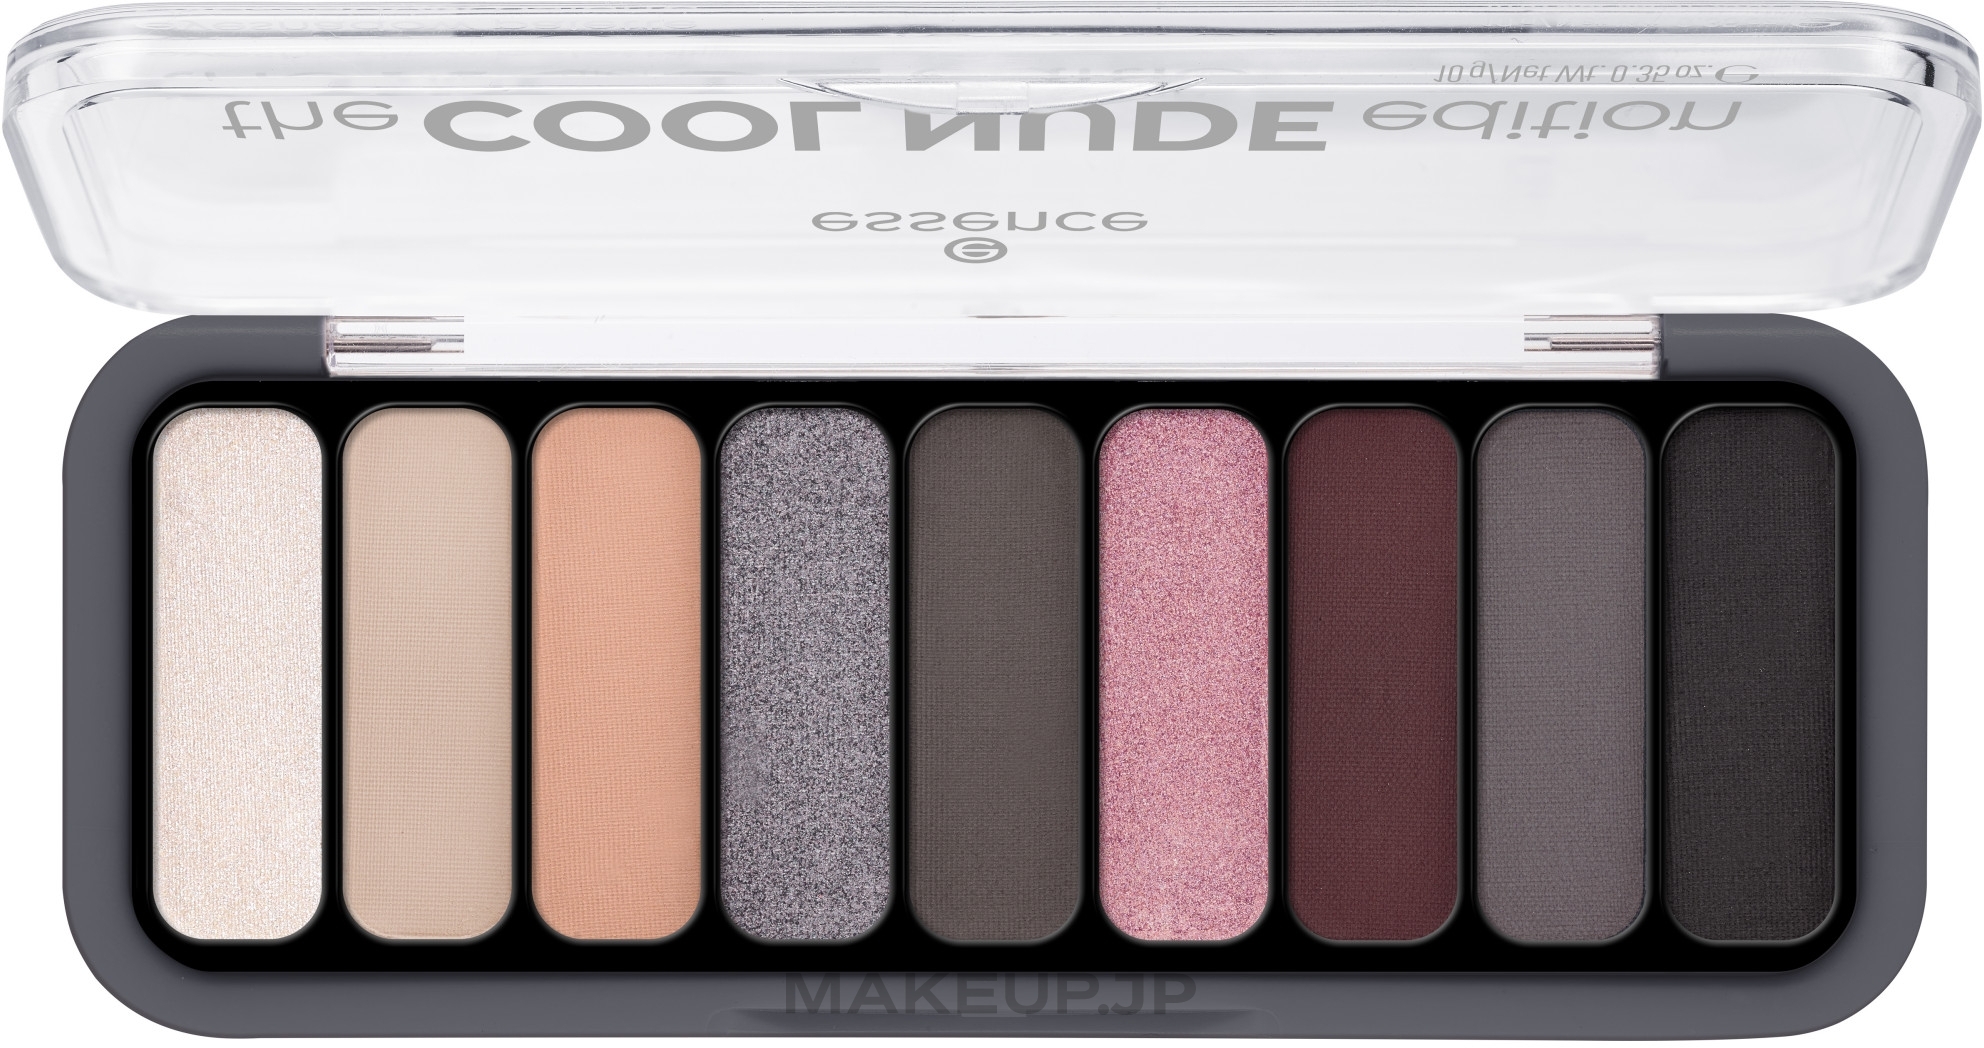 Eyeshadow Palette - Essence The Cool Nude Edition Eyeshadow Palette — photo 10 g